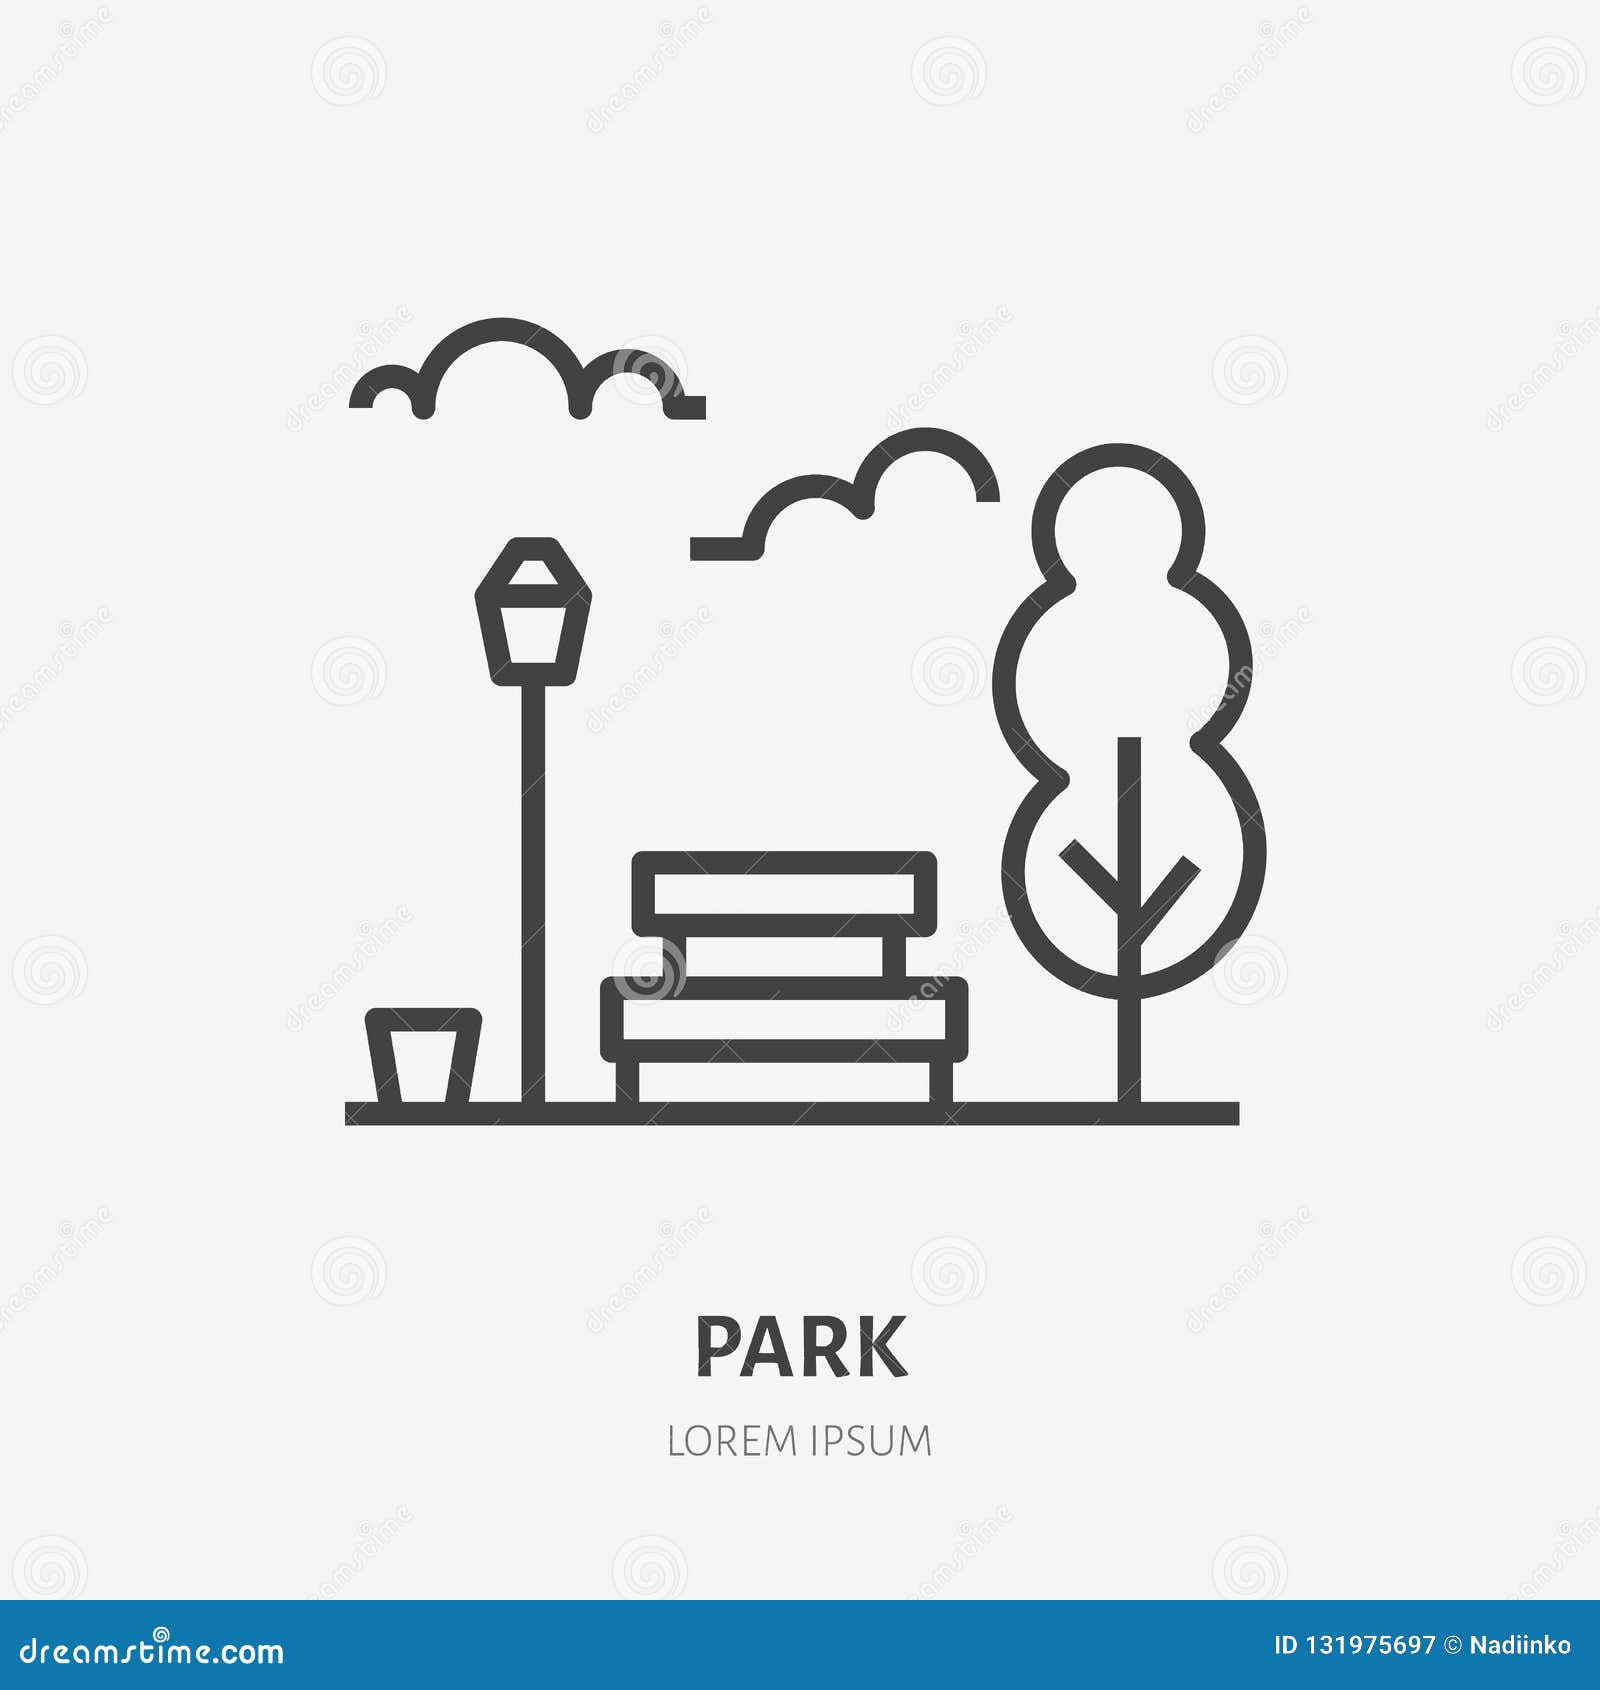 park flat line icon.  thin sign of bench, tree, sky and street light, urban public place logo. city infrastructure